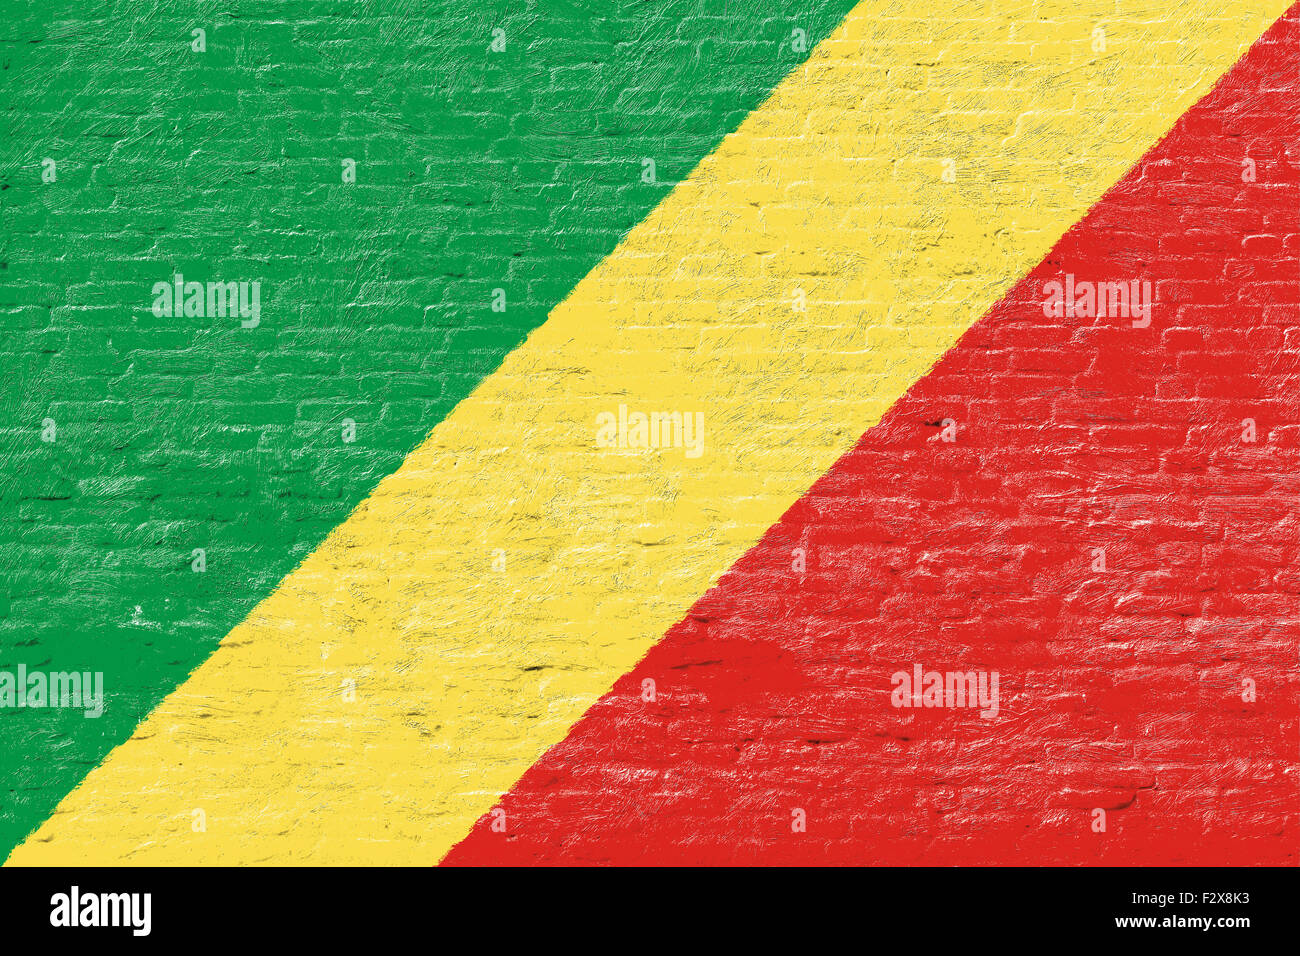 Republic of the Congo - National flag on Brick wall Stock Photo